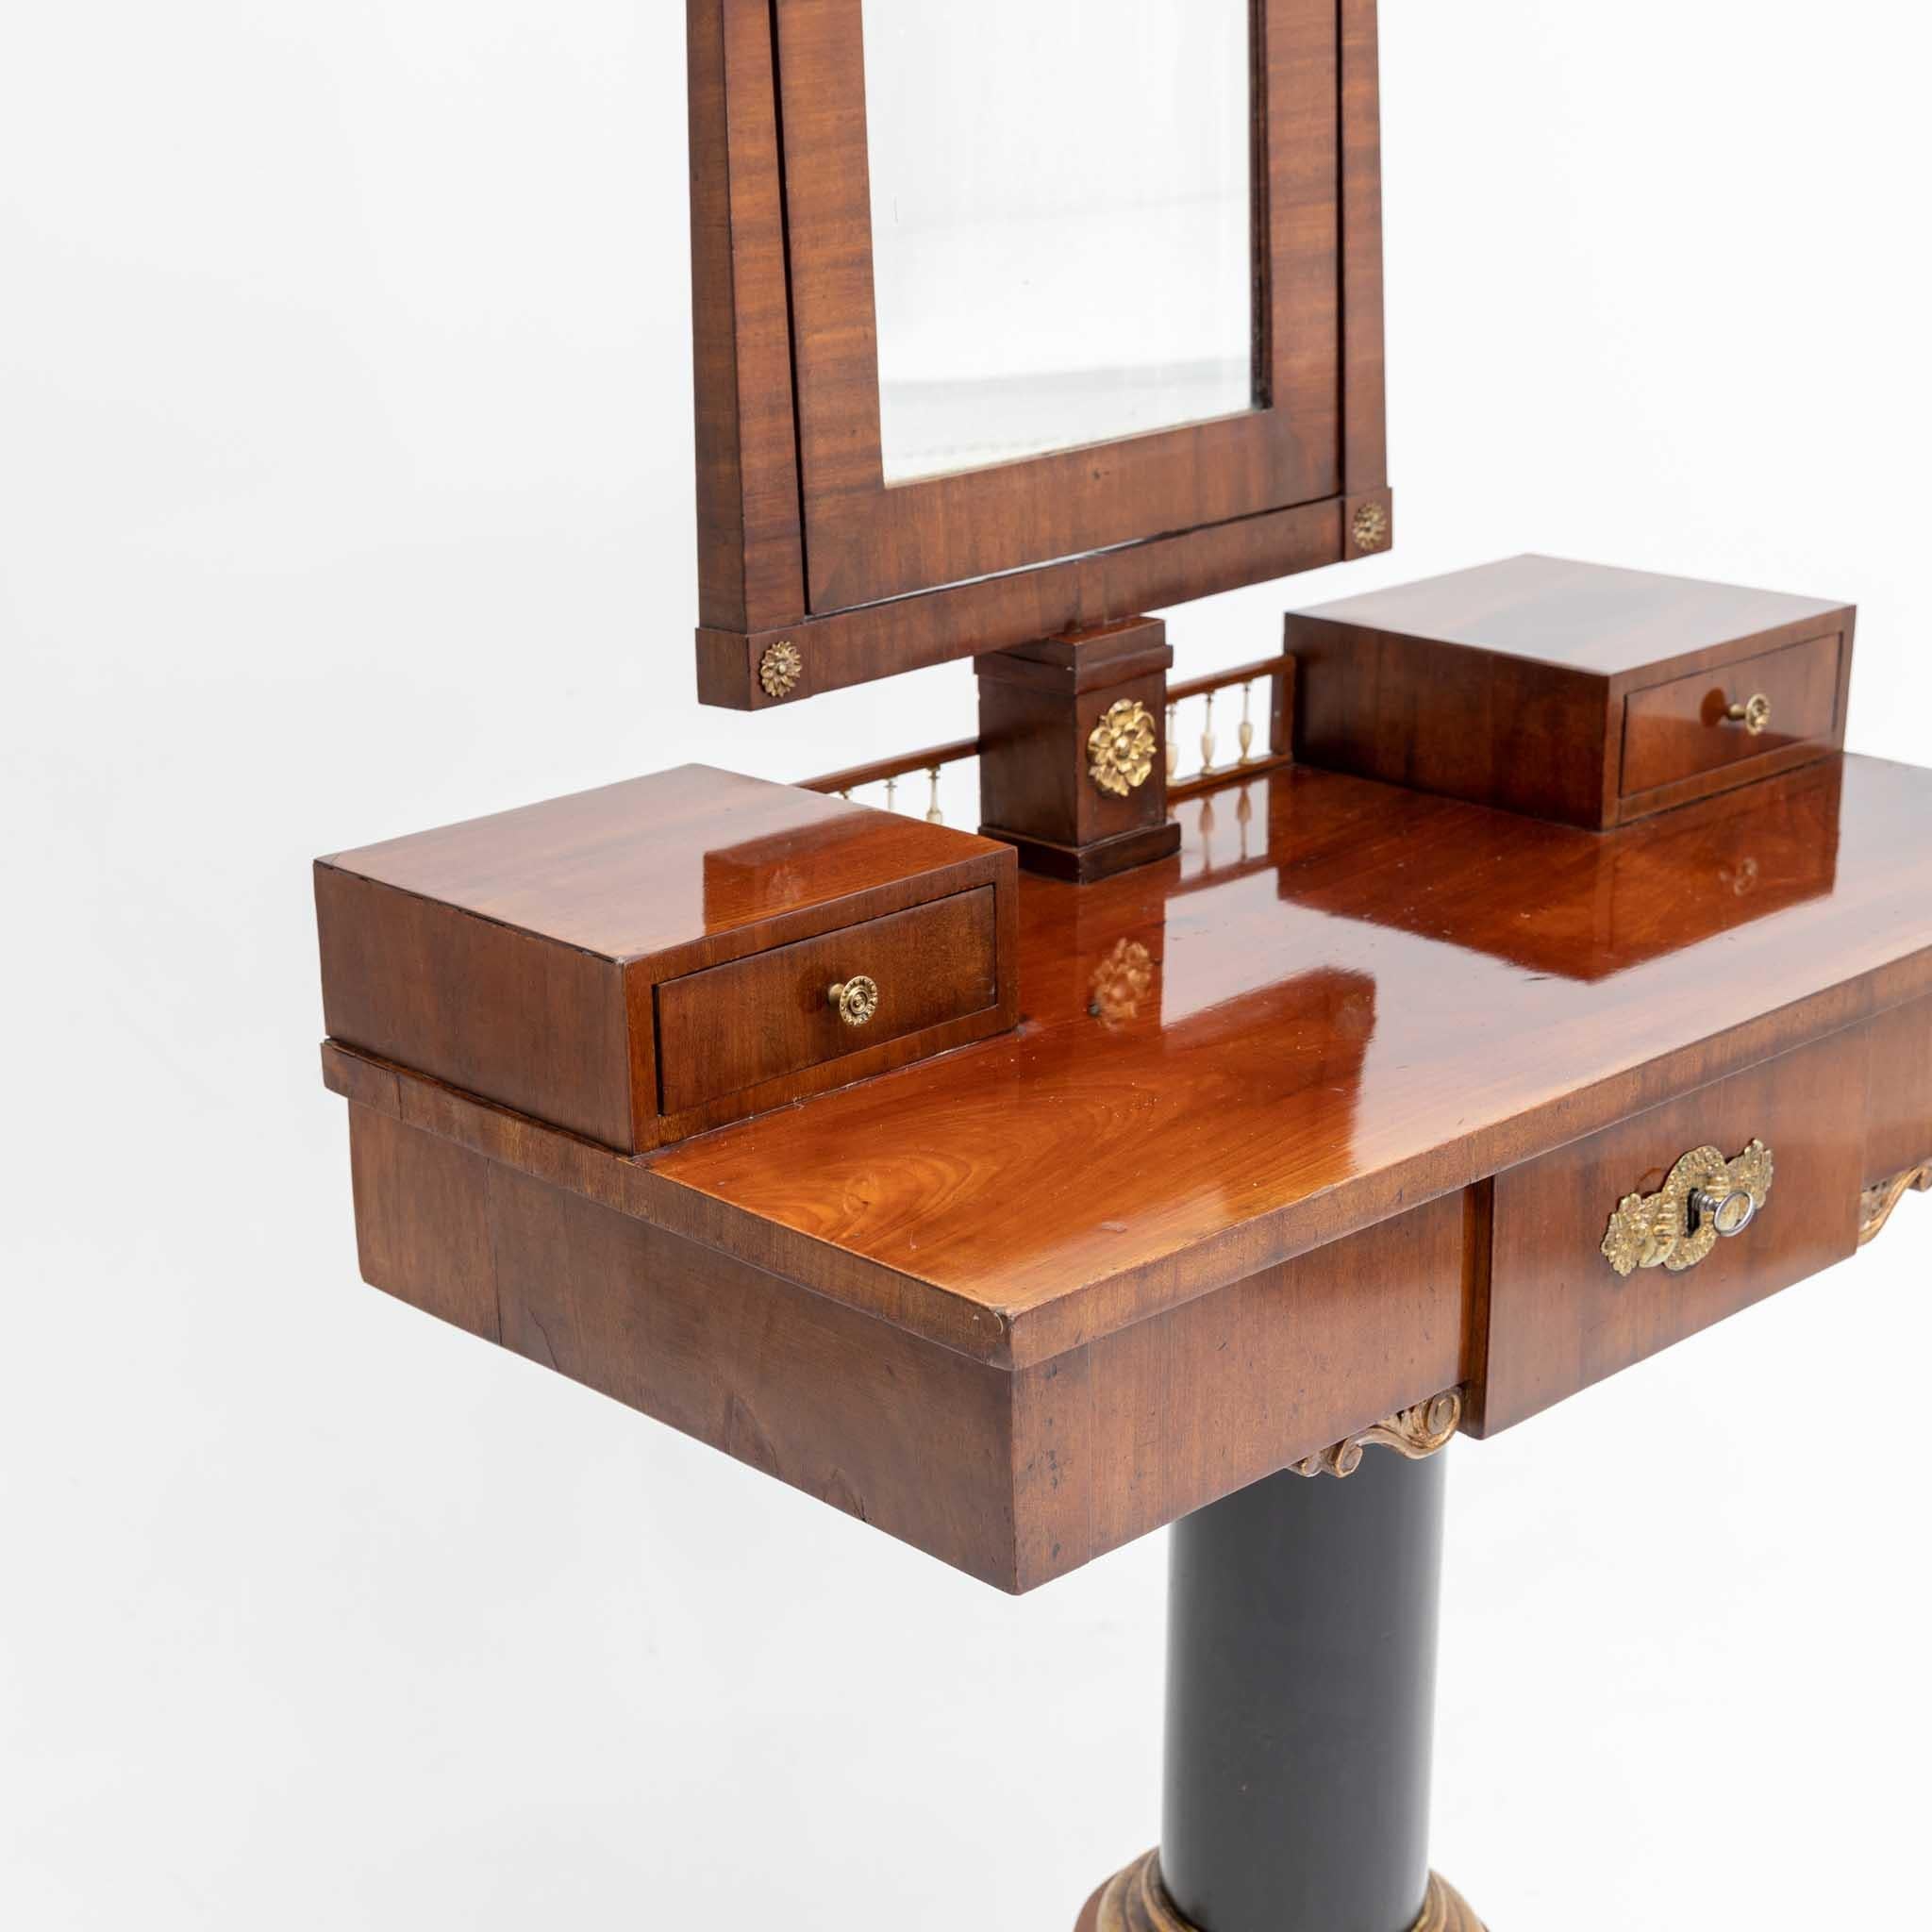 Danish Biedermeier dressing table with adjustable mirror with an architectural layout and fire-gilded fittings. The dressing table is equipped with two small drawers, a gallery rail and a wide drawer and stands on an ebonized column foot with a